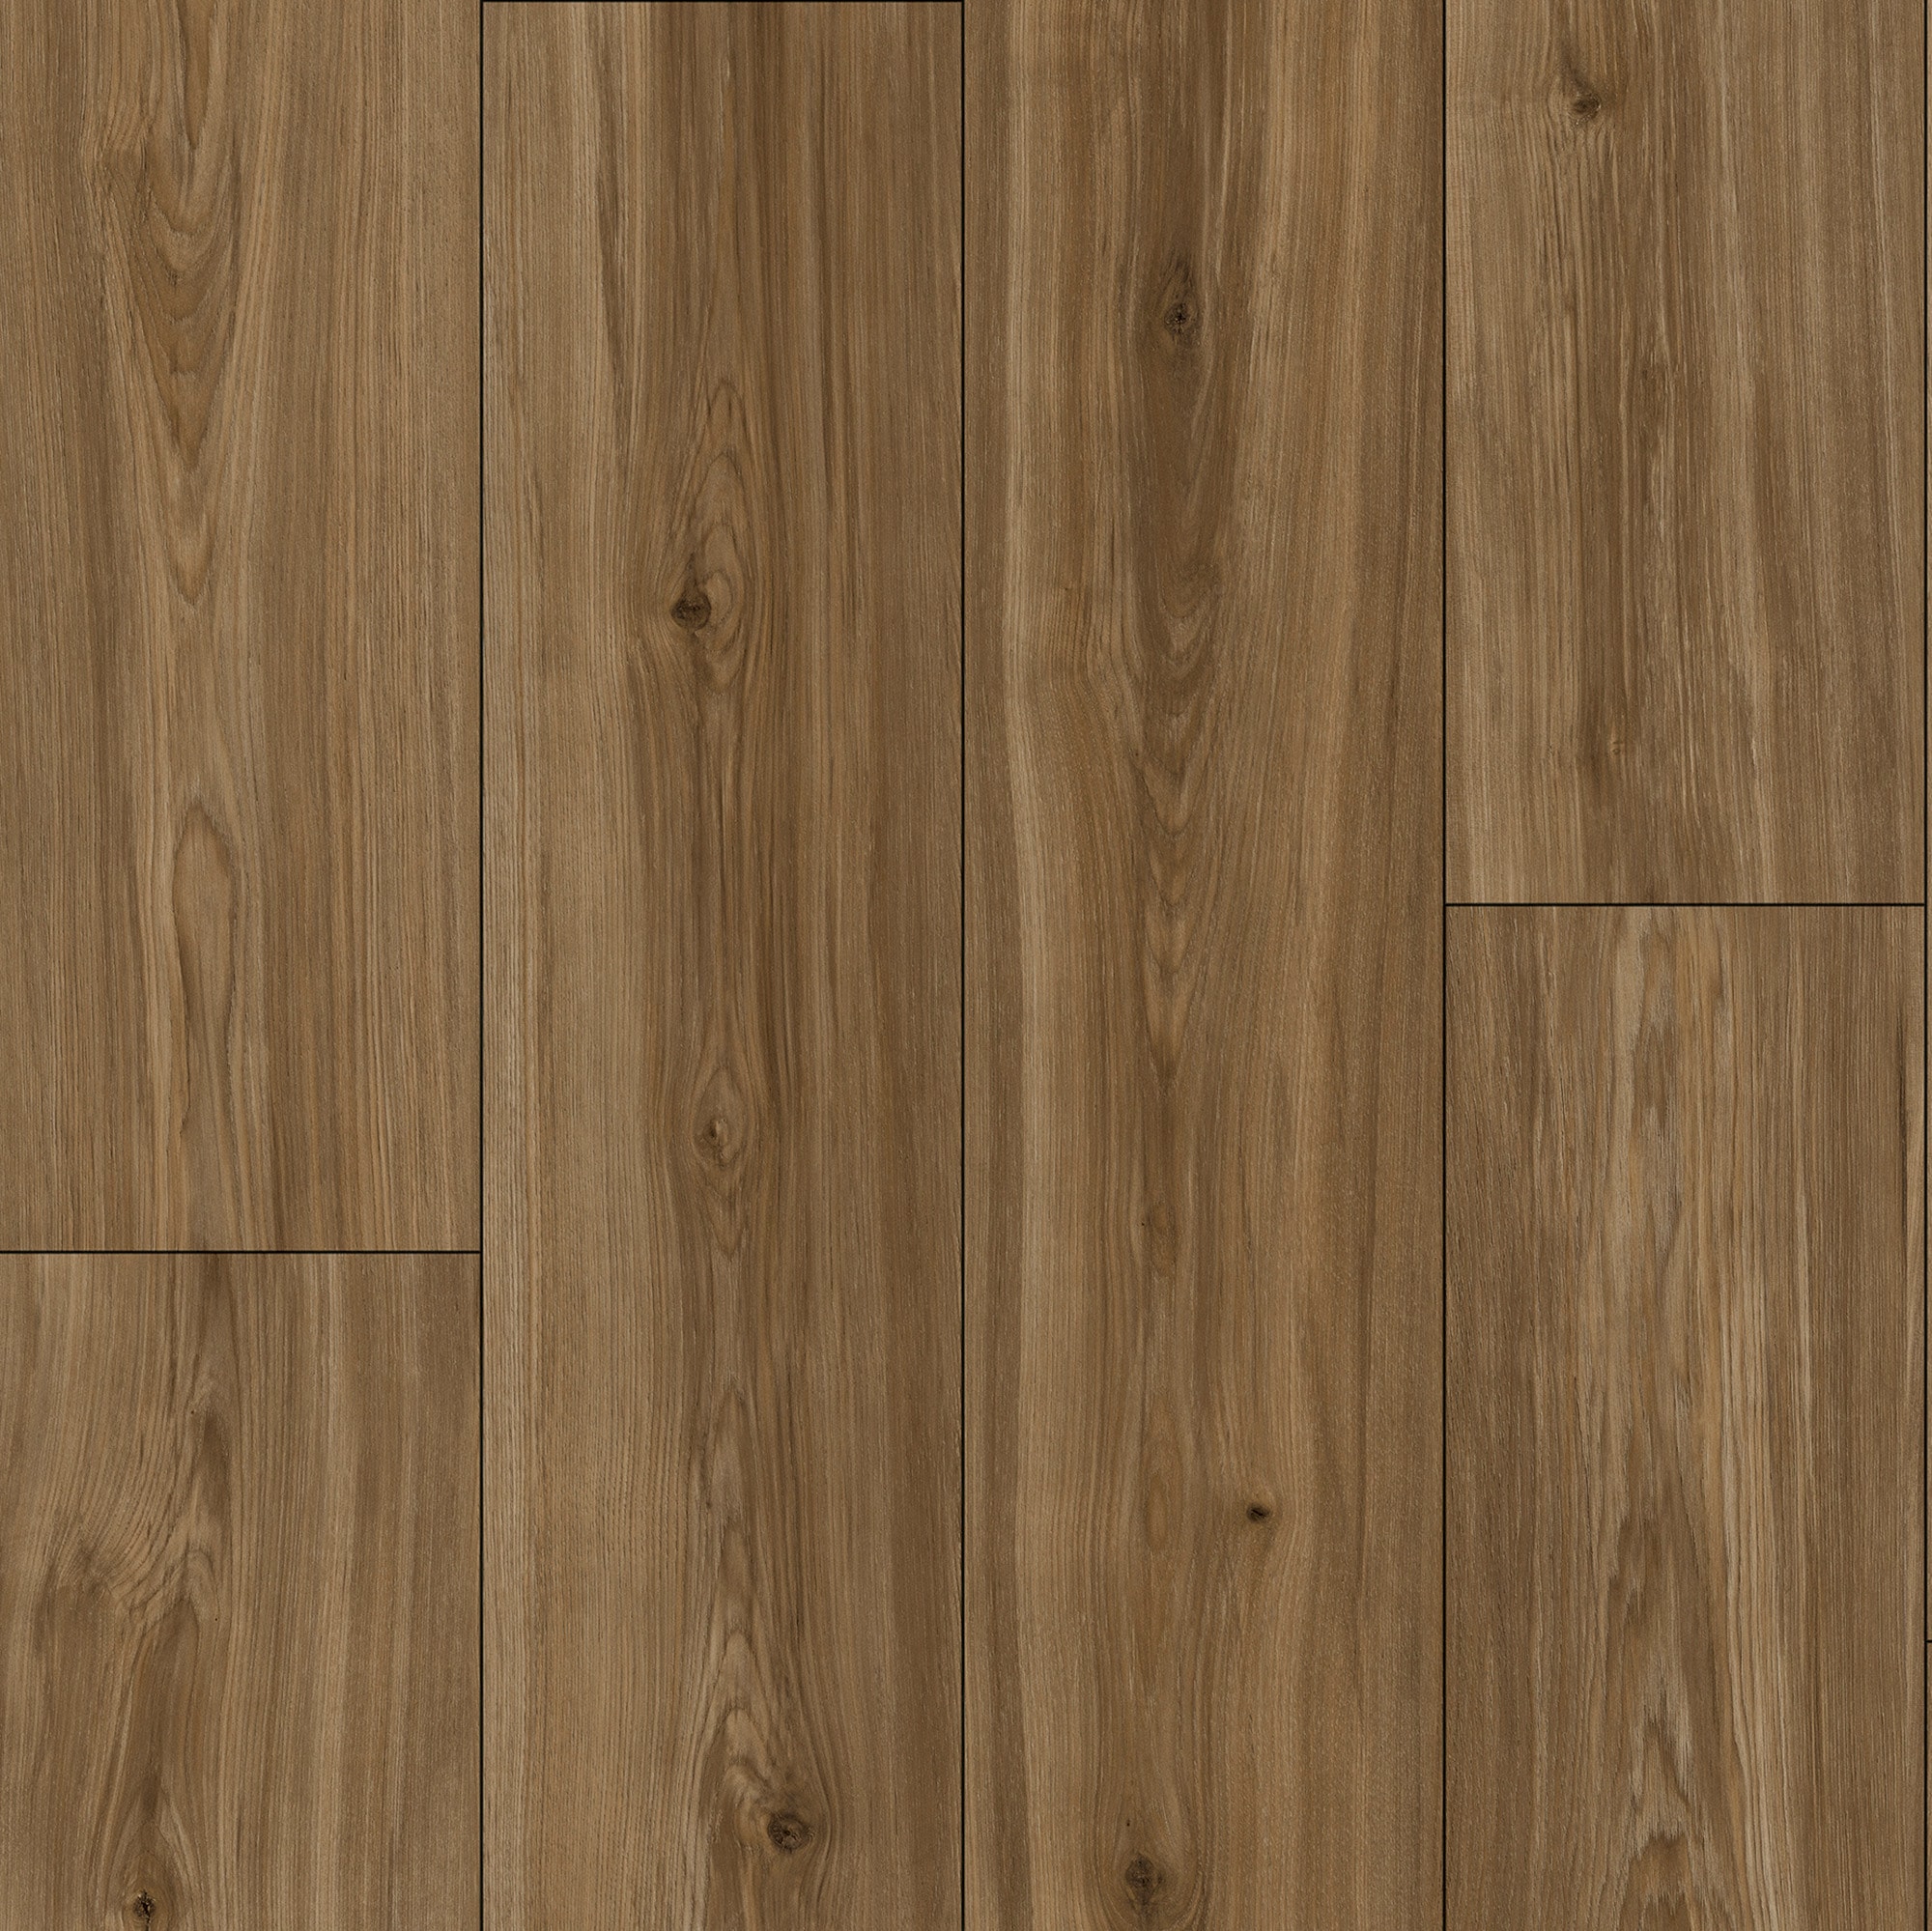 Bittersweet Hickory 12-mm T x 7-1/2-in W x 50-in L Wood Plank Laminate Flooring (23.7-sq ft) in Brown/Tan | - STAINMASTER PetProtect L1302